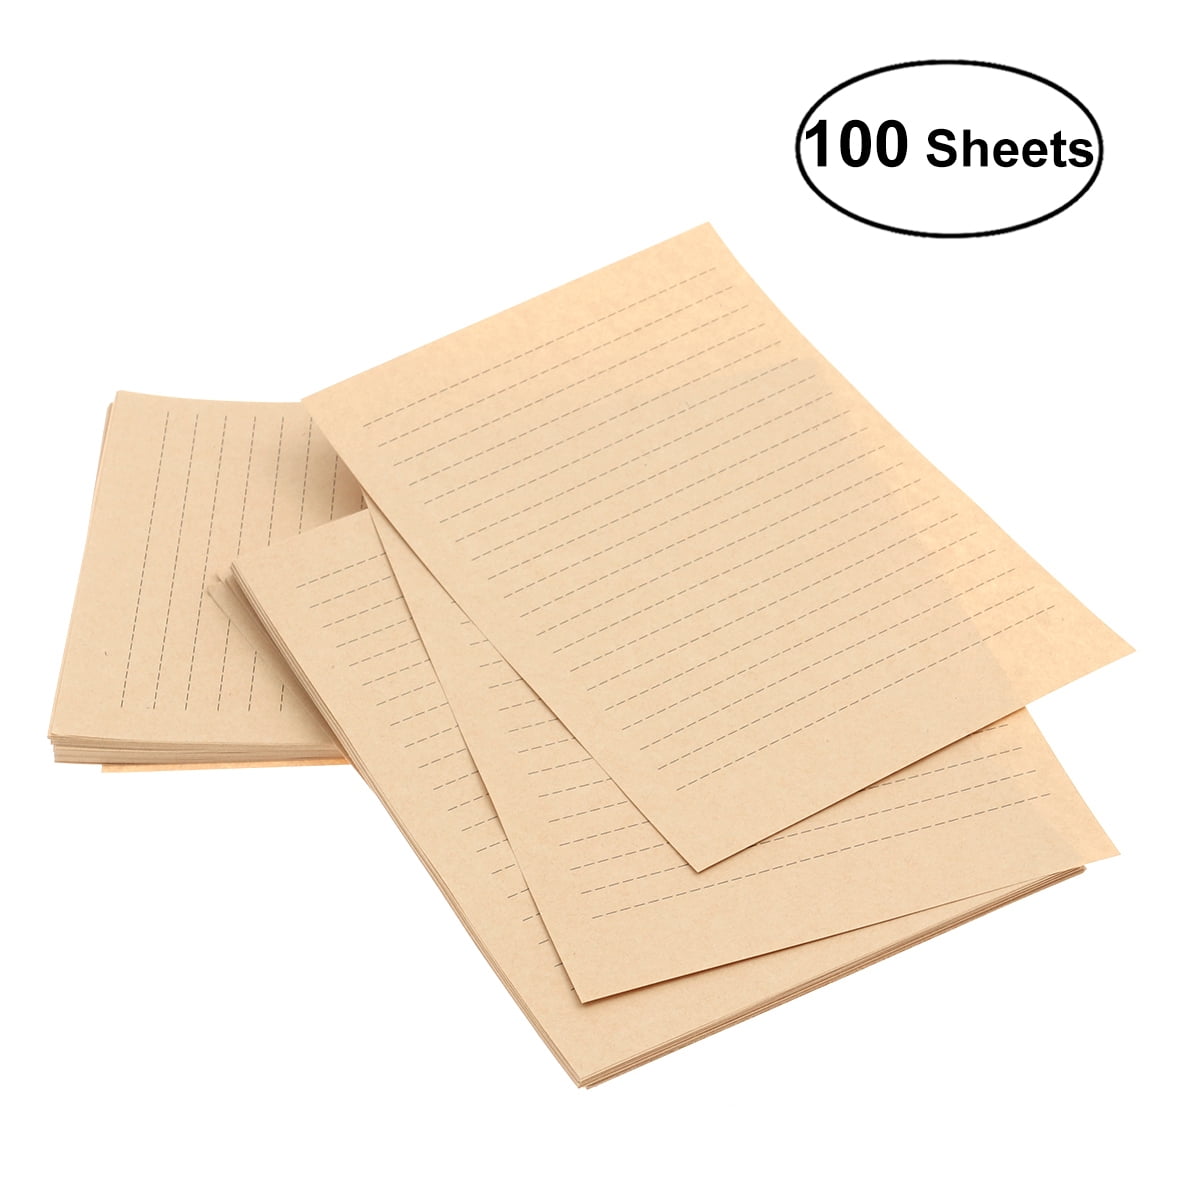 100 Old Age Parchment Paper for Writing - 60 Text ( 24 Bond) Sheets - 8.5 X  11 Inches Standard Letter Flyer Size - Not Card Weight - Vintage Colored  Old Parchment Look 8.5x11 - 100 Sheets